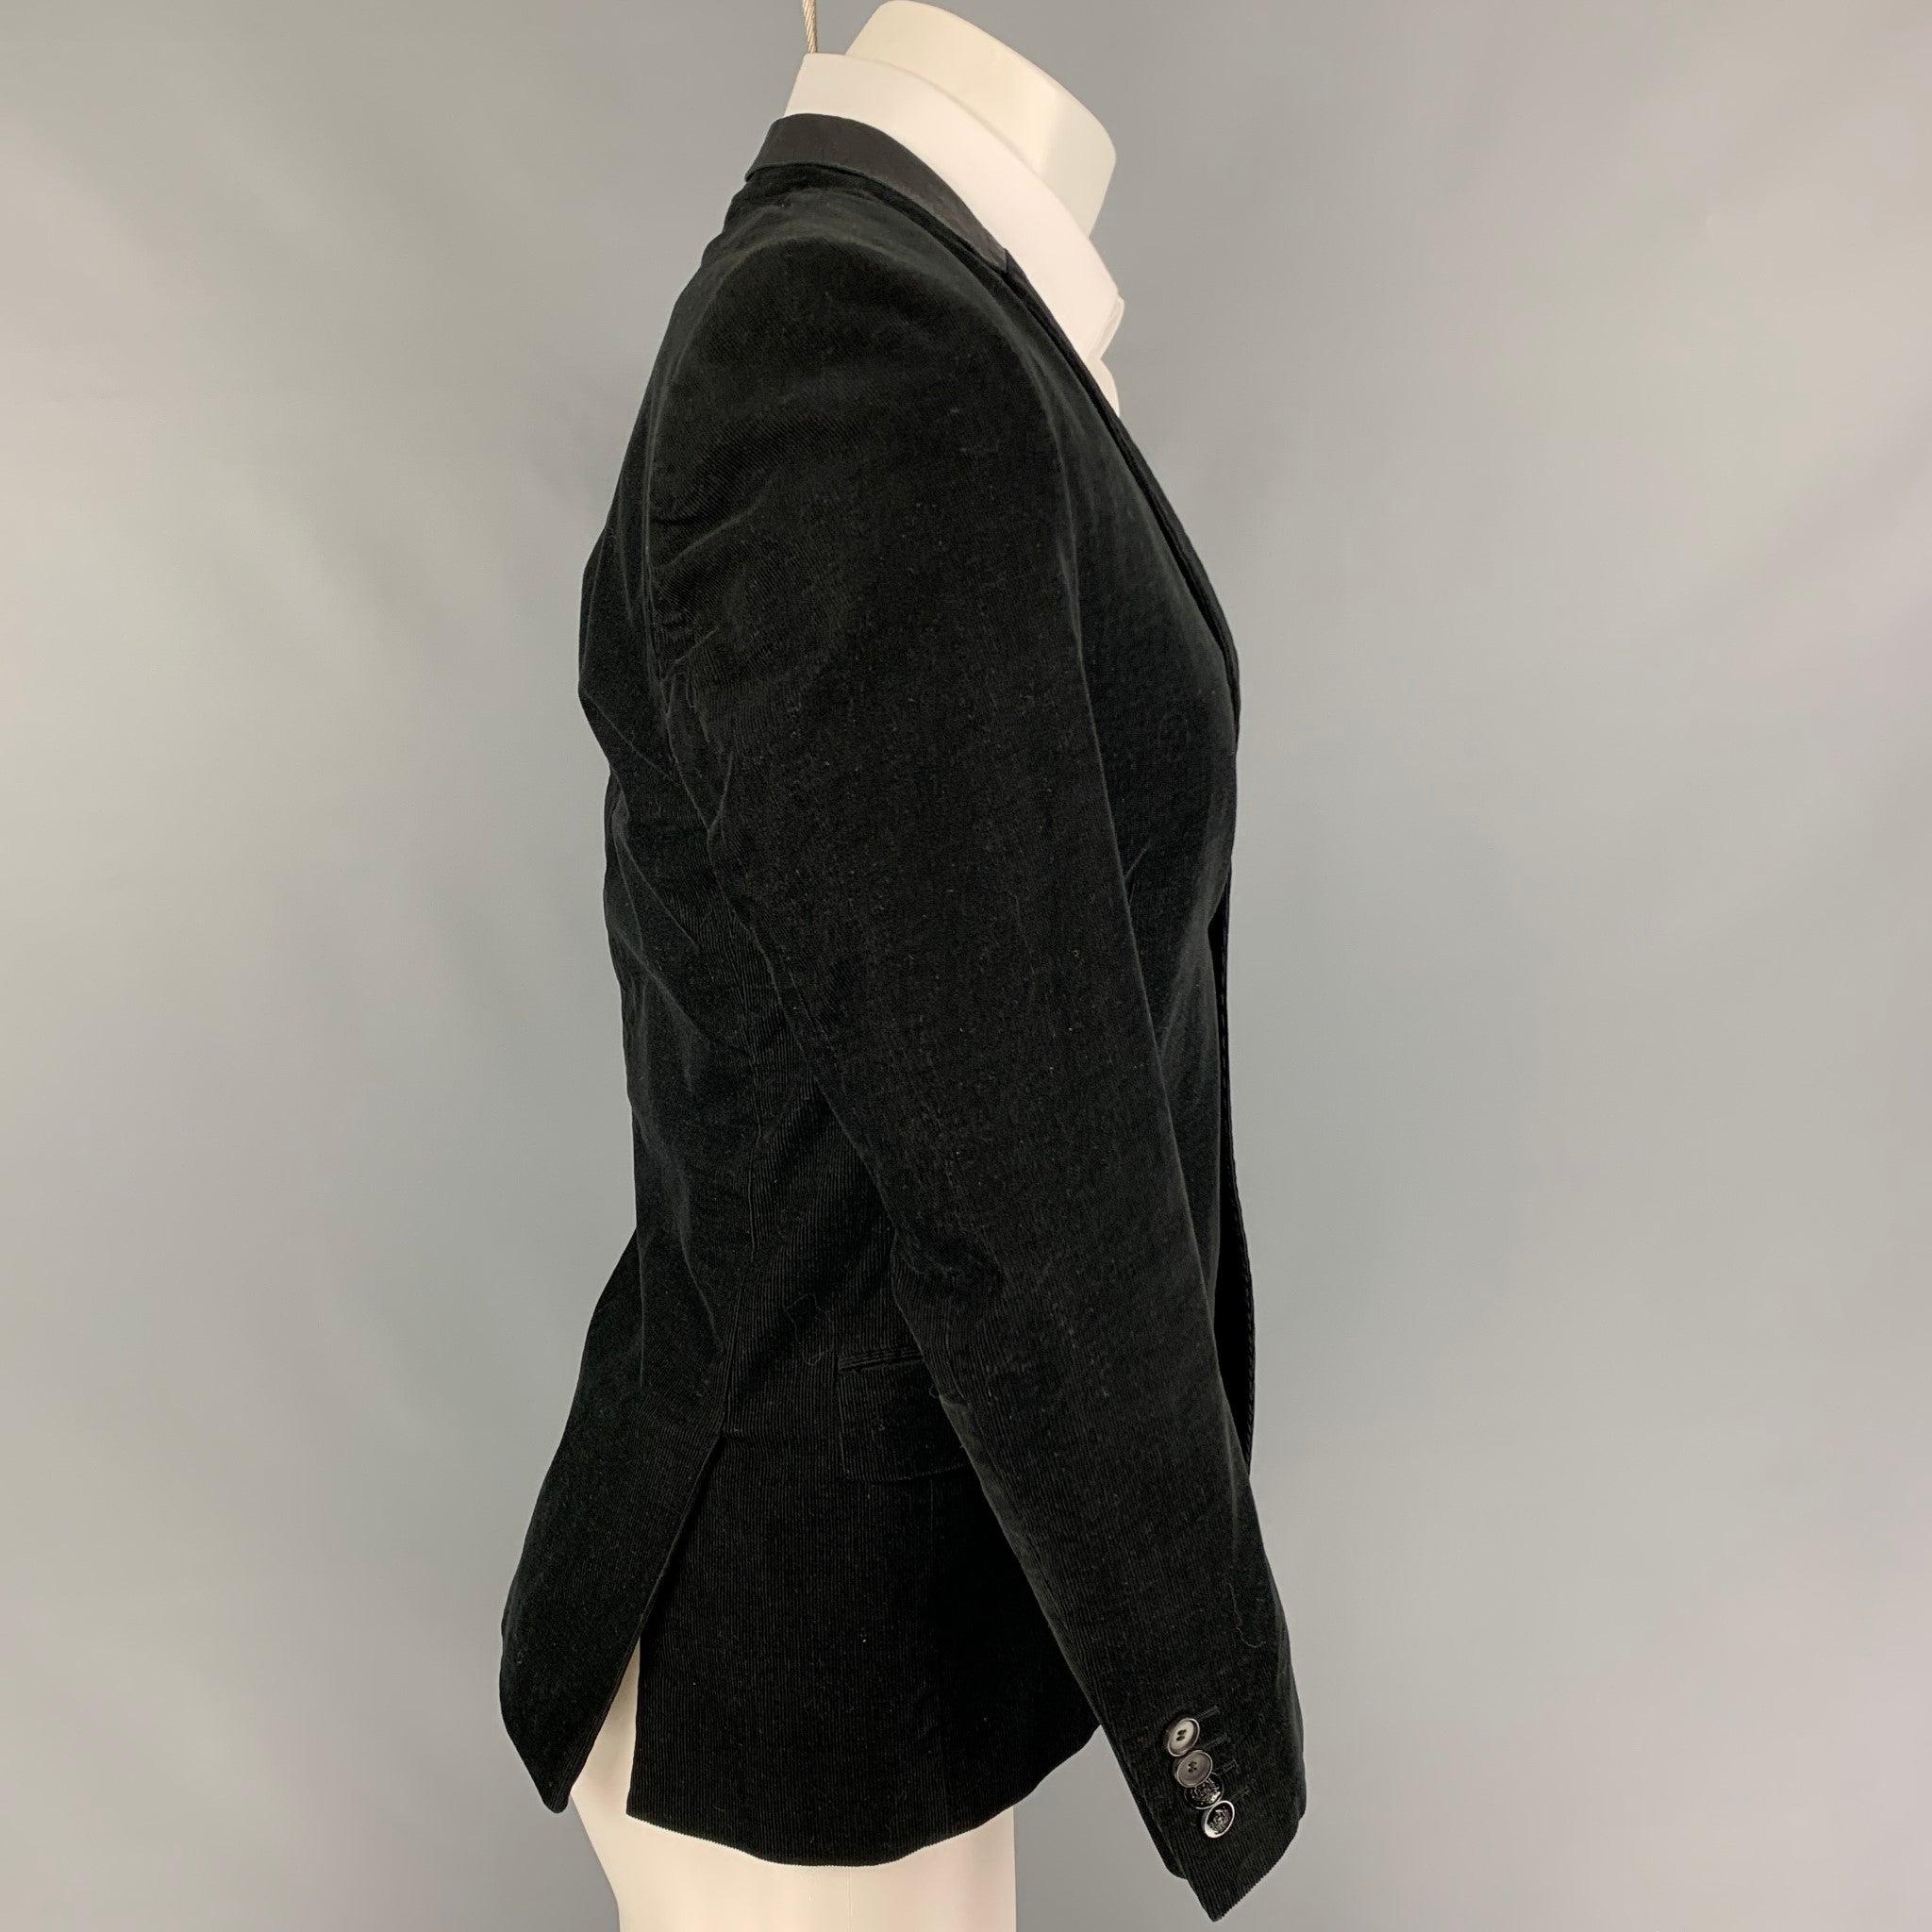 THE KOOPLES sport coat comes ina 
black corduroy cotton with a full liner featuring a notch lapel, leather trim, flap pockets, double back vent, and a double button closure.
Very Good
Pre-Owned Condition. 

Marked:   46 

Measurements: 
 
Shoulder: